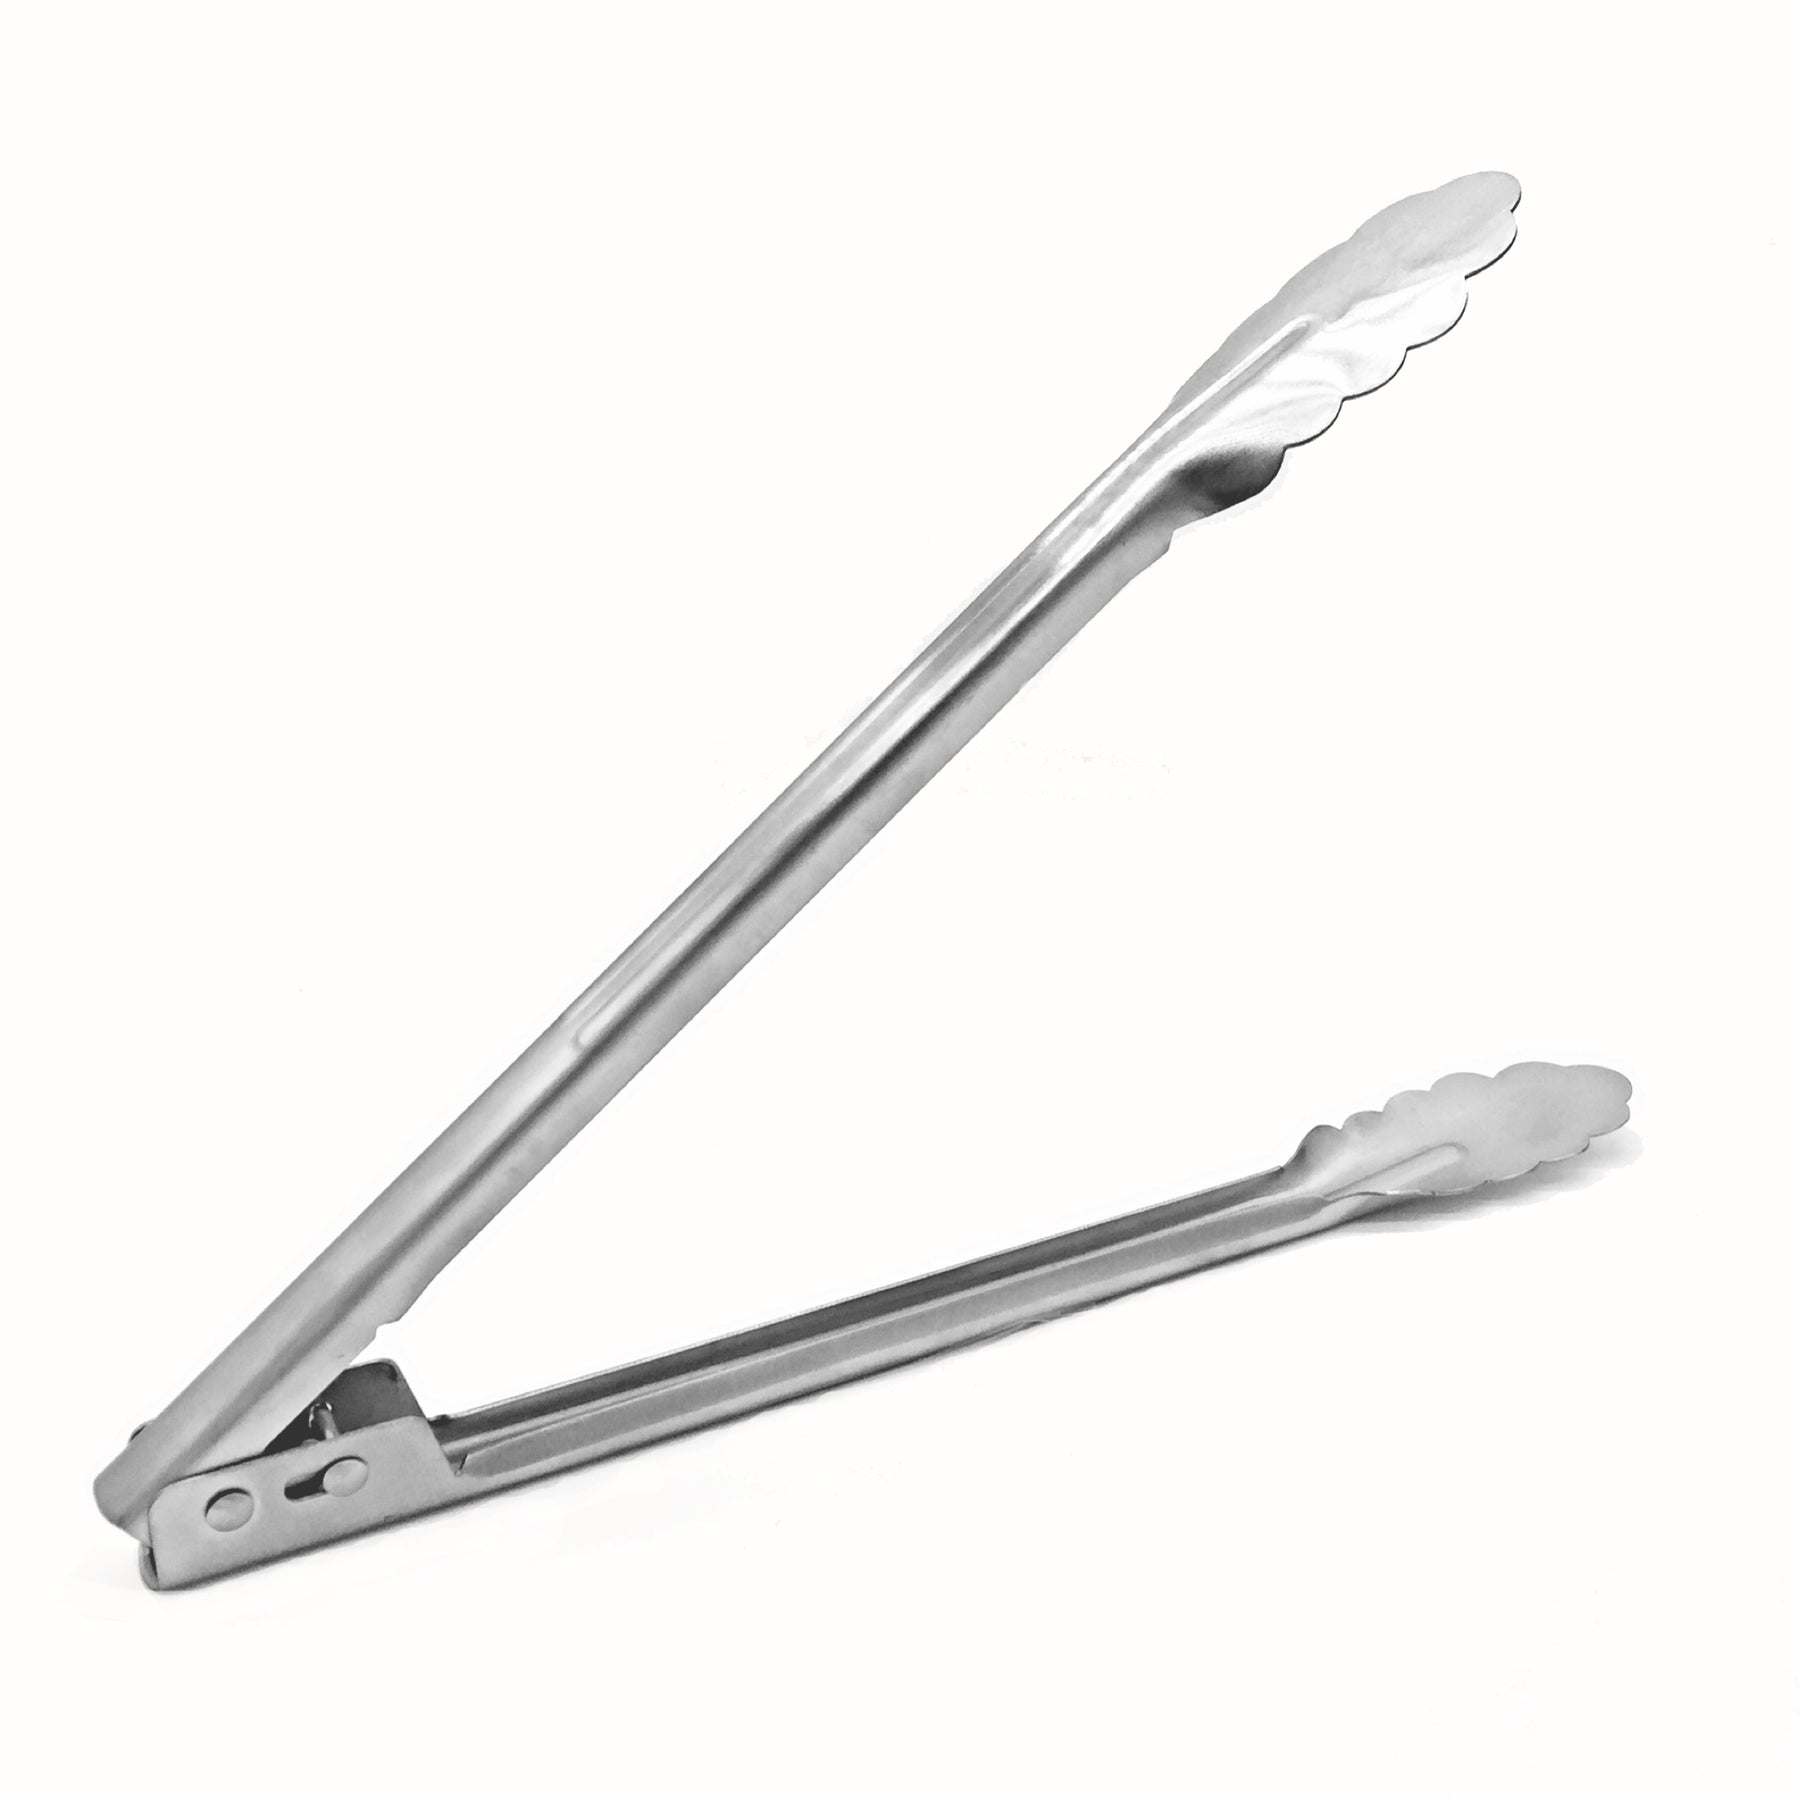 Restaurantware Met Lux Stainless Steel Heavy-Duty Tongs - with Rubber Grip - 12 inch - 1 Count Box, Size: 12, Silver